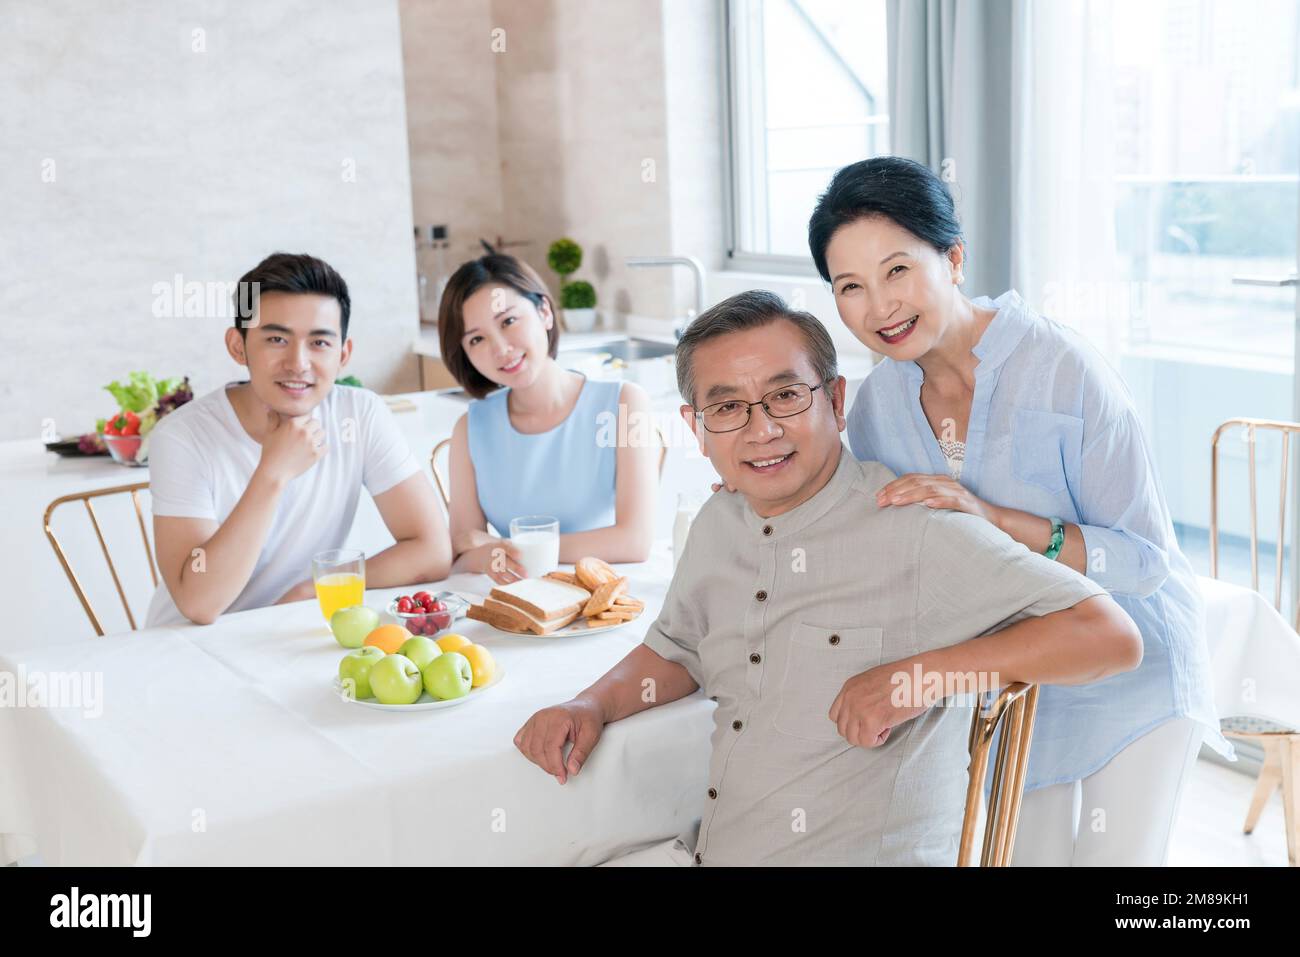 Happy family dinner in the kitchen Stock Photo